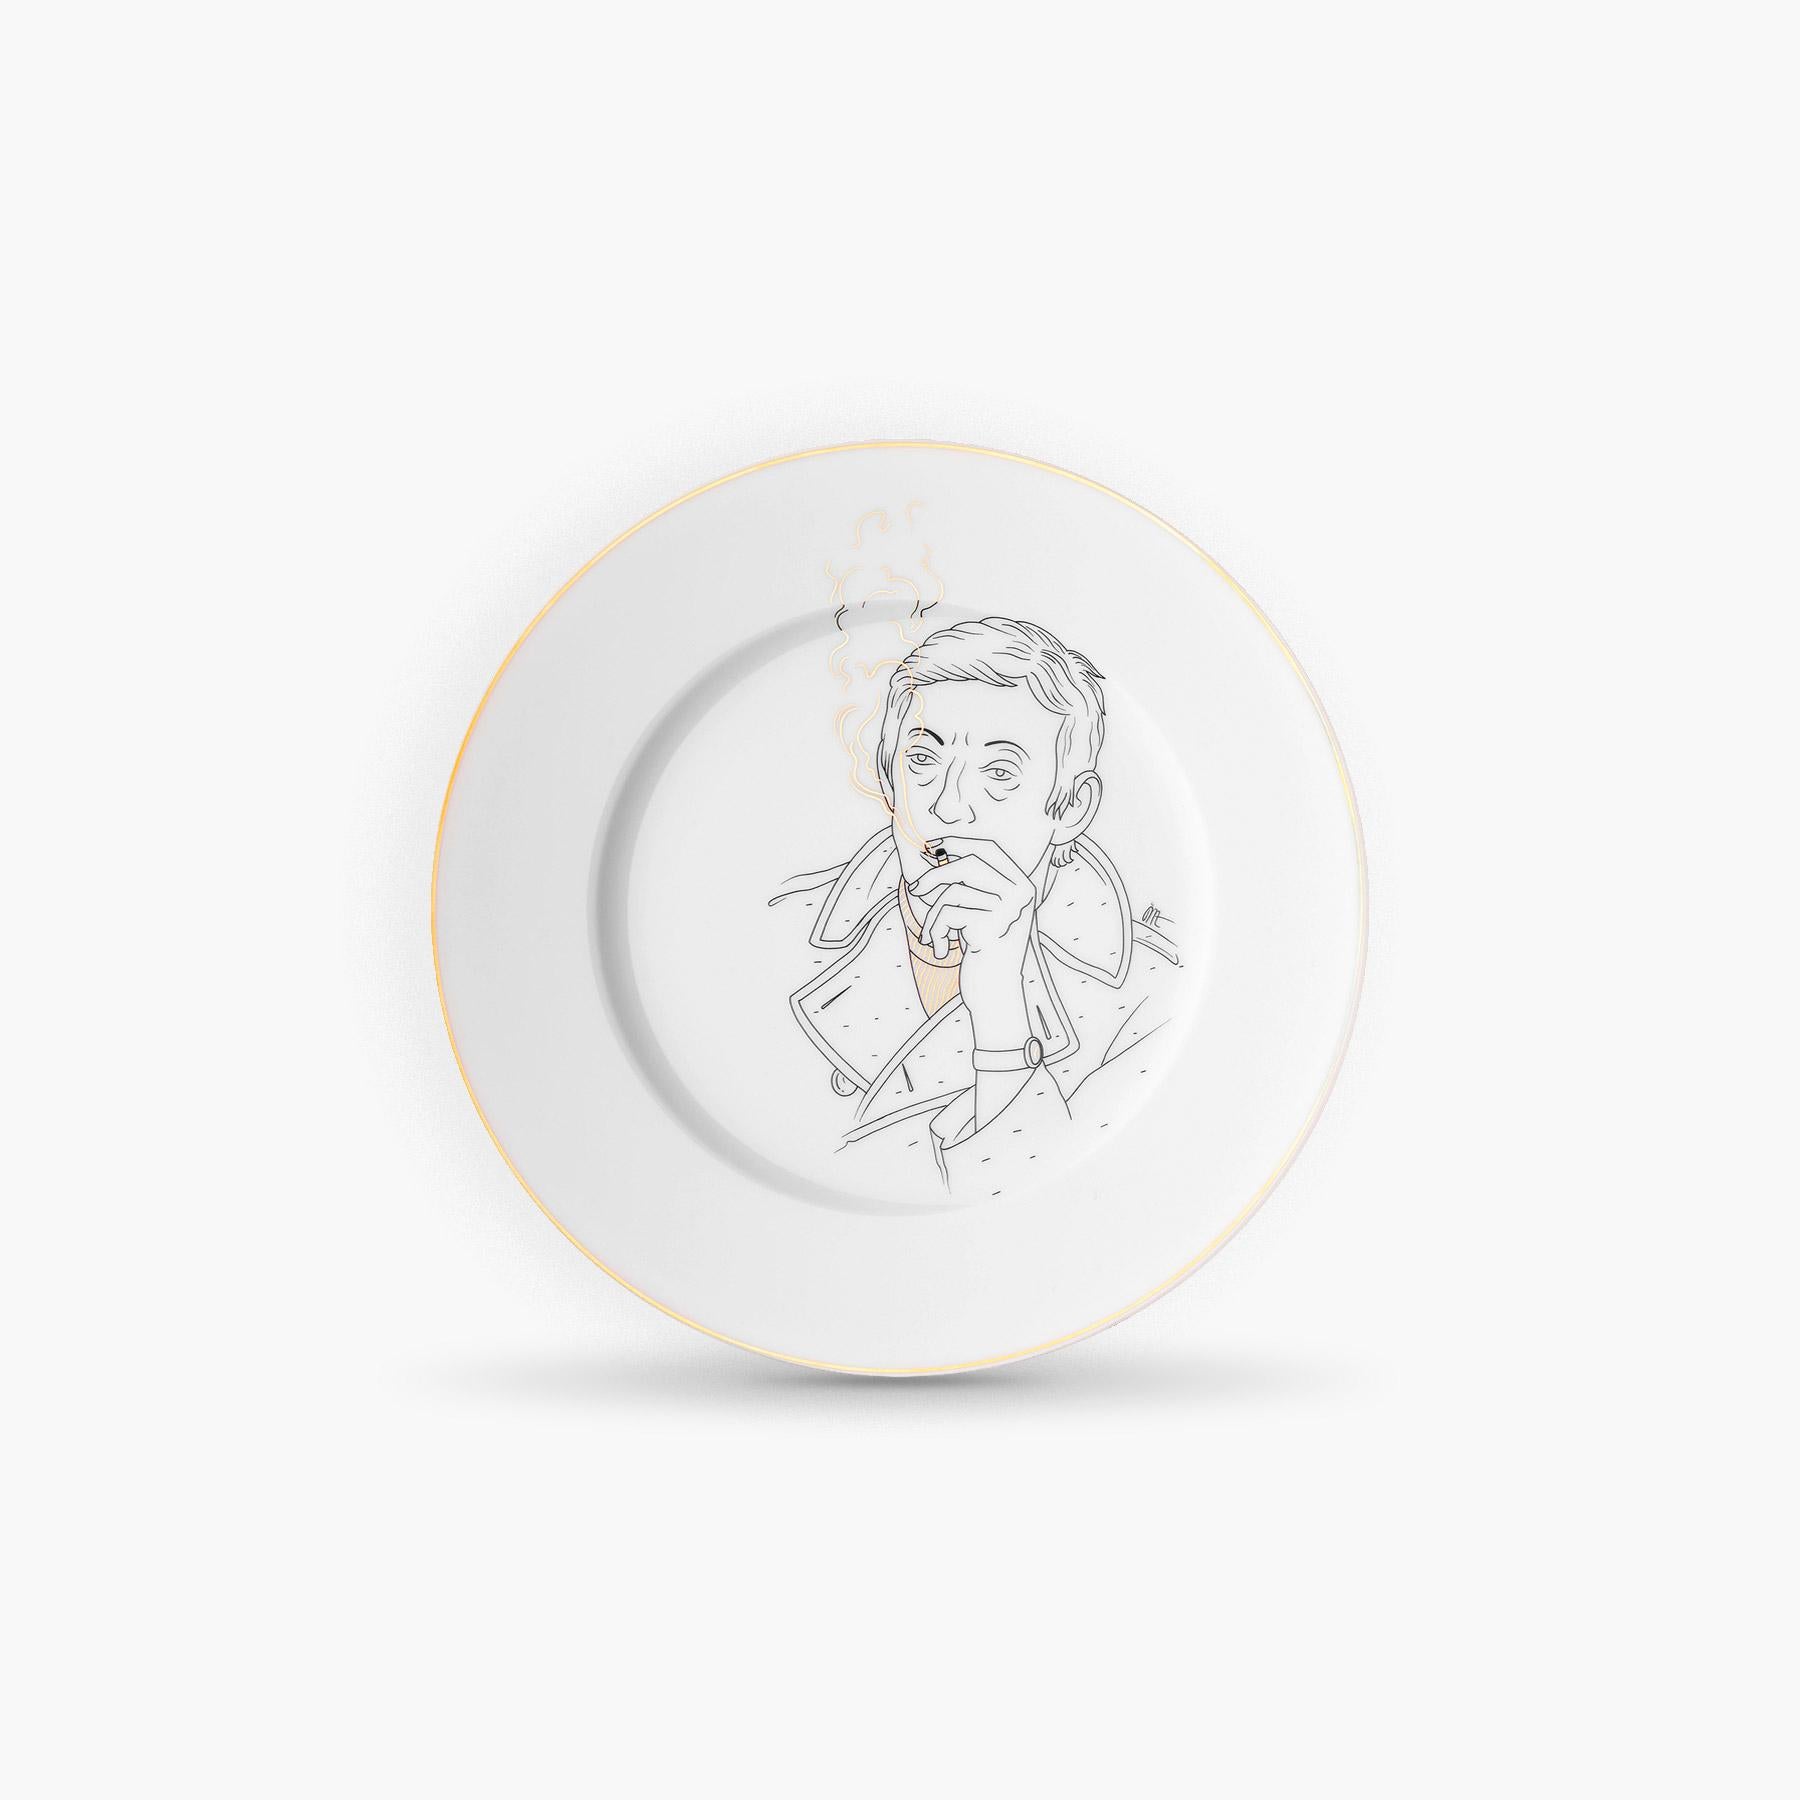 Maison Fragile and the Parisian illustrator artist Jean-Michel Tixier have joined together to create a collection that pays tribute to these men and women, key figures of history, who have made Paris as we know it.

Box of 4 dessert plates of the